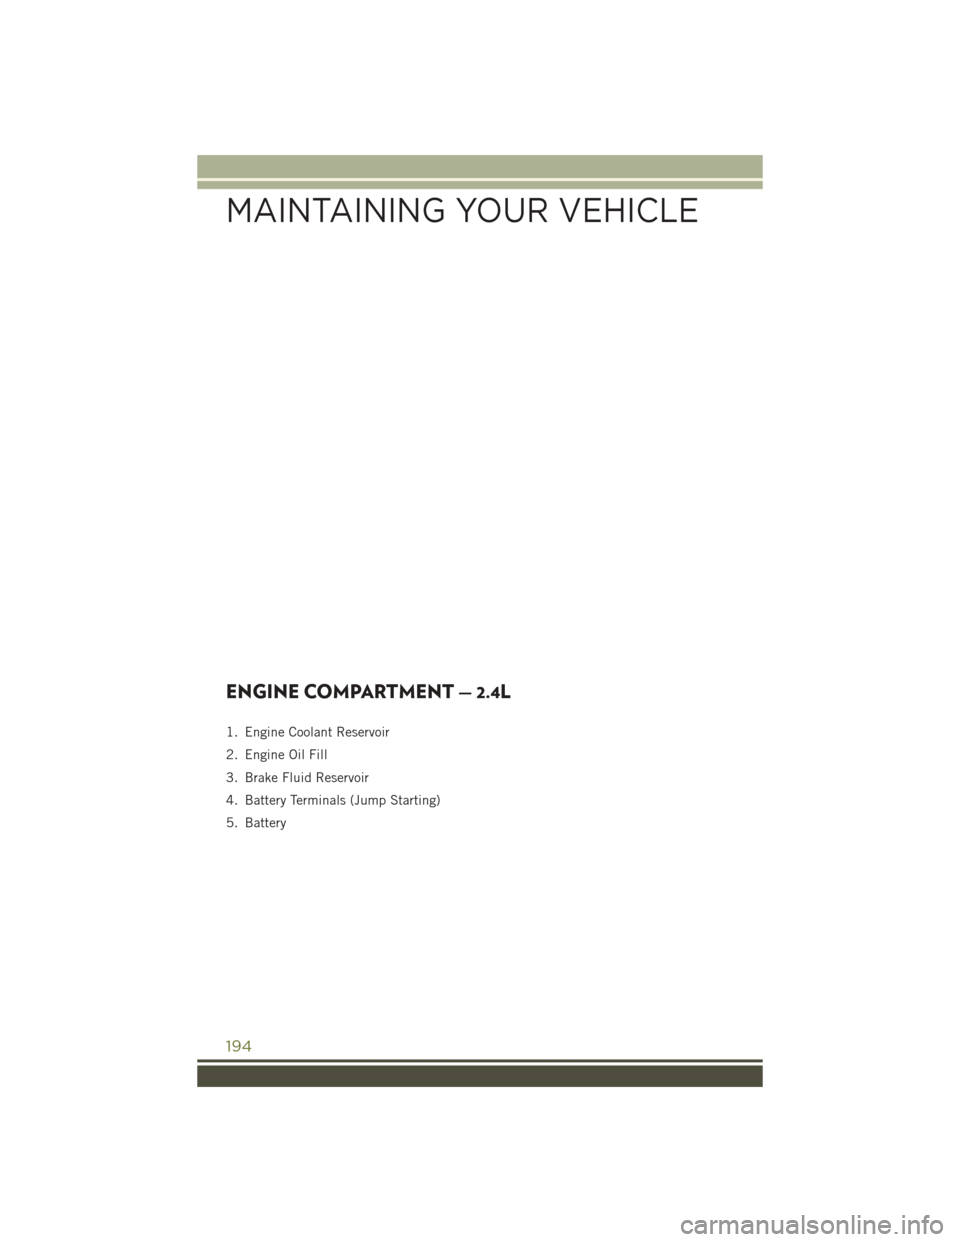 JEEP CHEROKEE 2016 KL / 5.G Service Manual ENGINE COMPARTMENT — 2.4L
1. Engine Coolant Reservoir
2. Engine Oil Fill
3. Brake Fluid Reservoir
4. Battery Terminals (Jump Starting)
5. Battery
MAINTAINING YOUR VEHICLE
194 